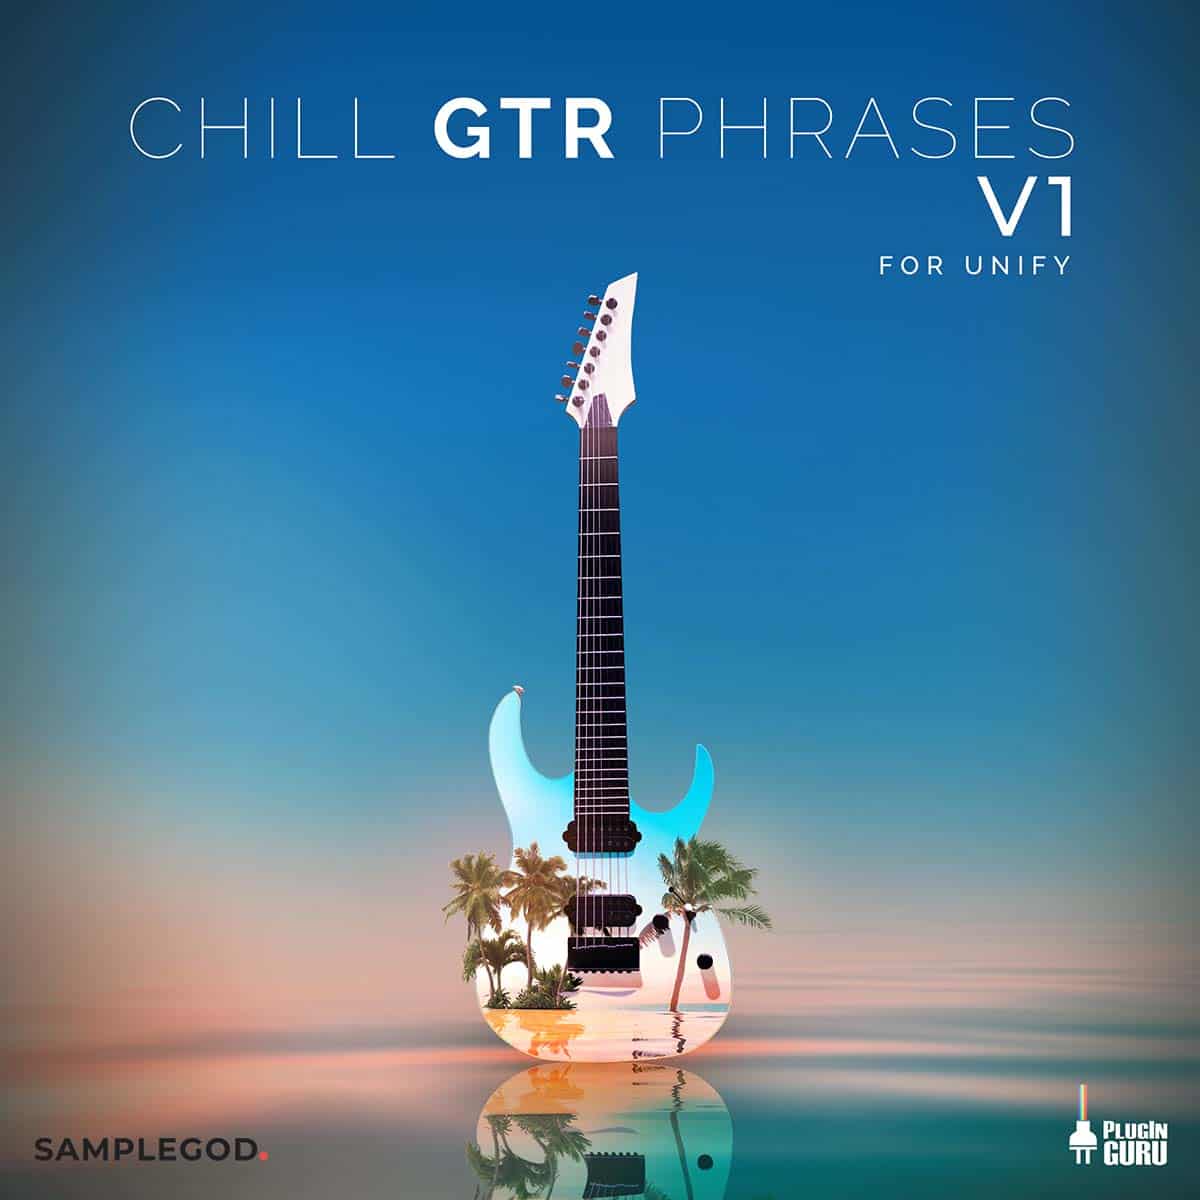 Chill GTR Phrases V1 MEGA PATCH UPDATE IS HERE!